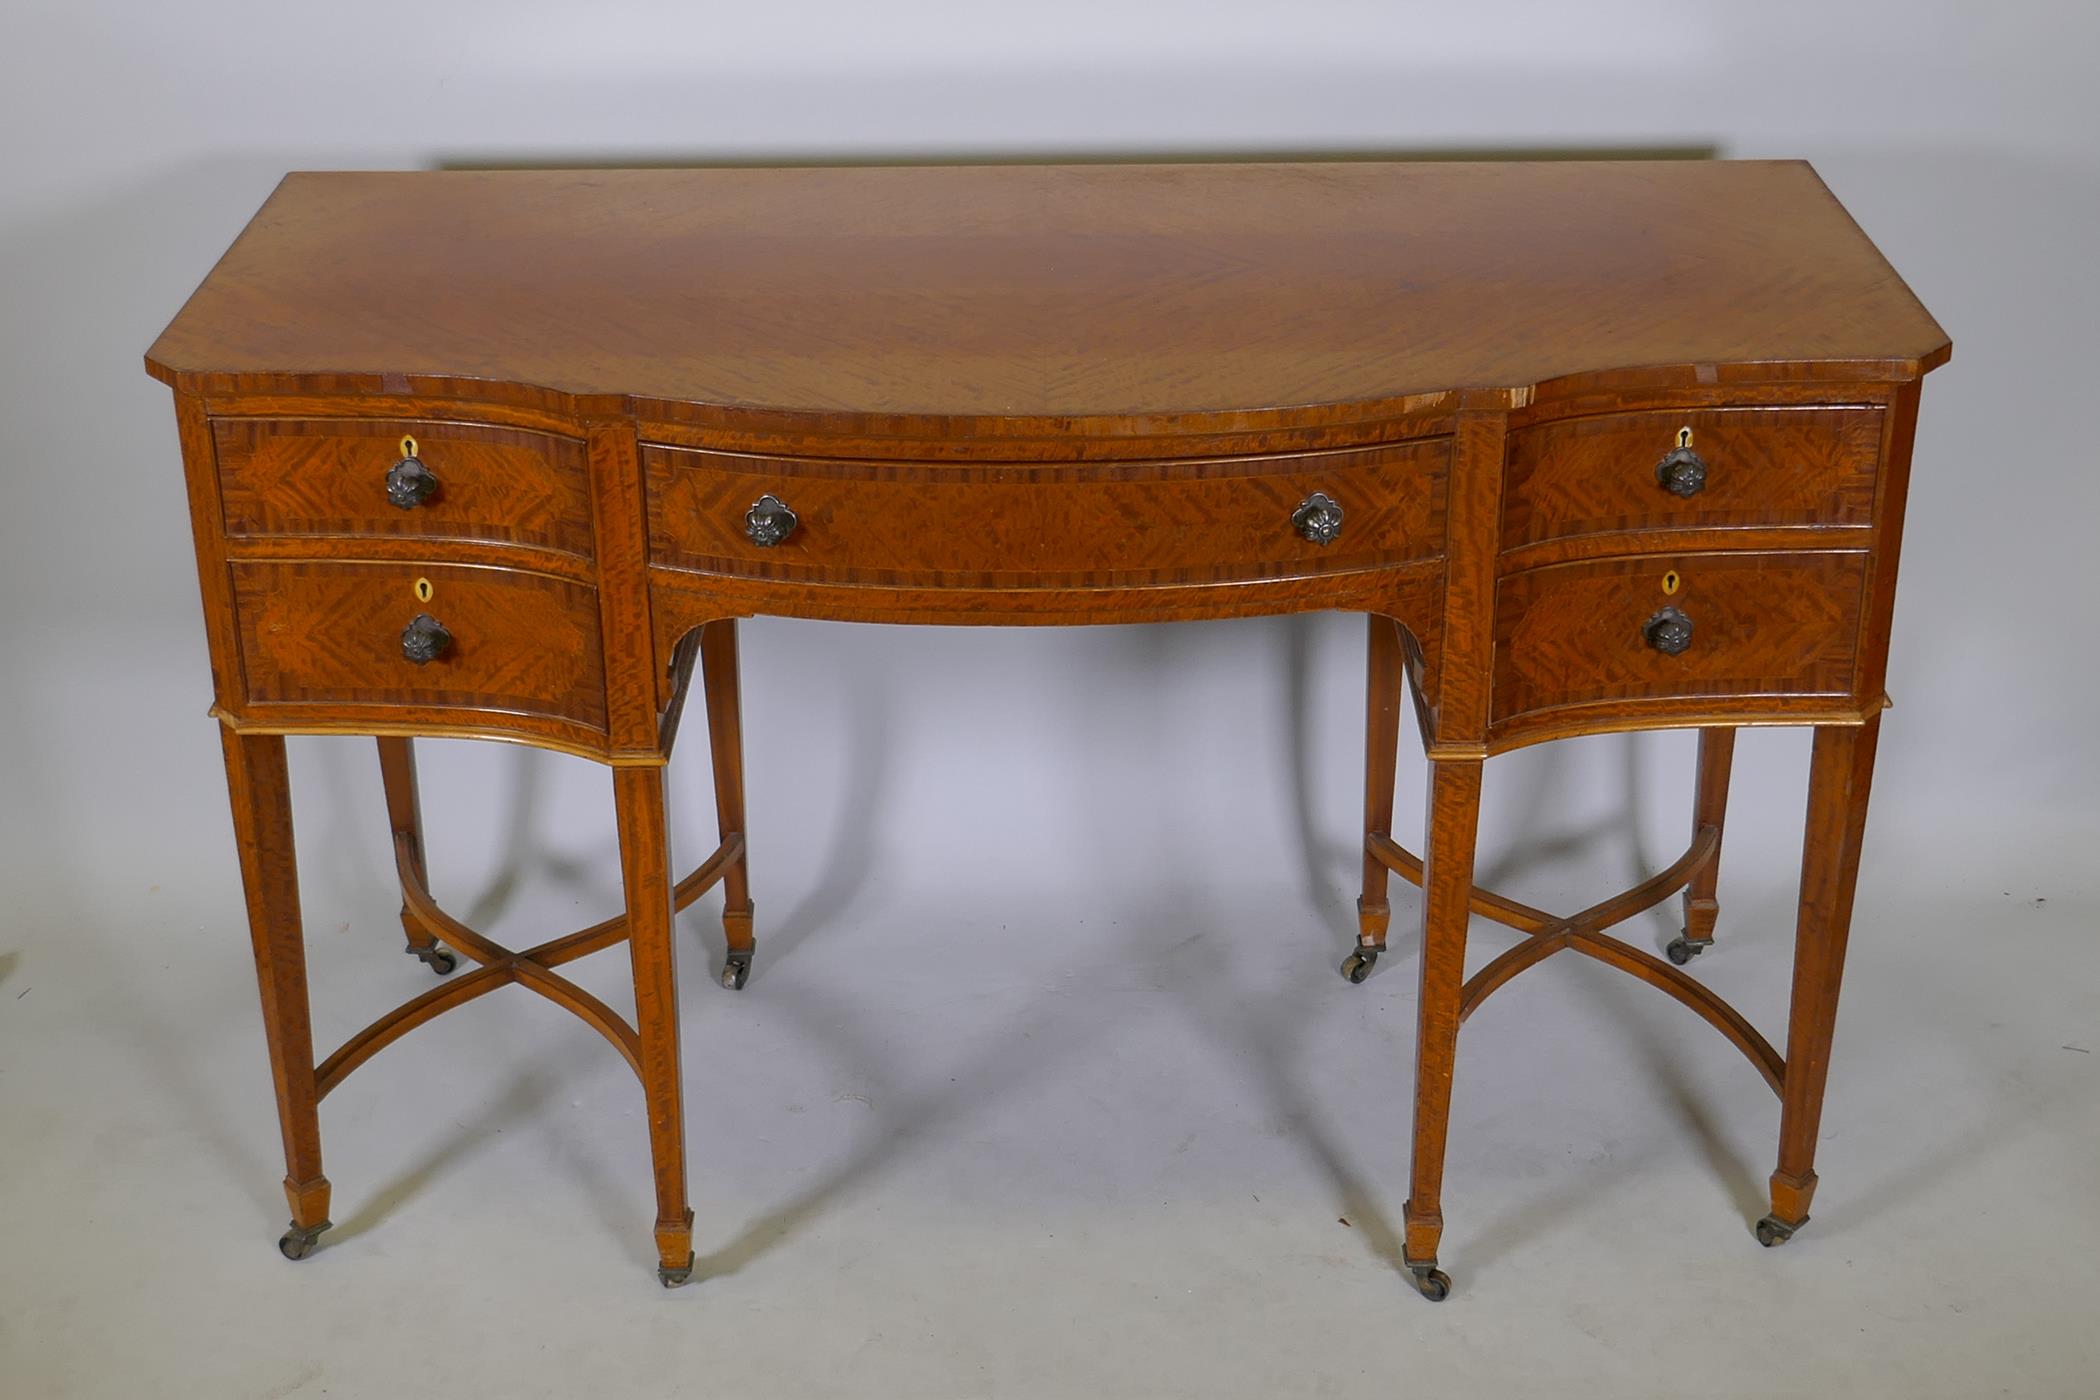 A C19th satinwood five drawer kneehole desk, with serpentine front and canted corners, raised on - Image 2 of 3